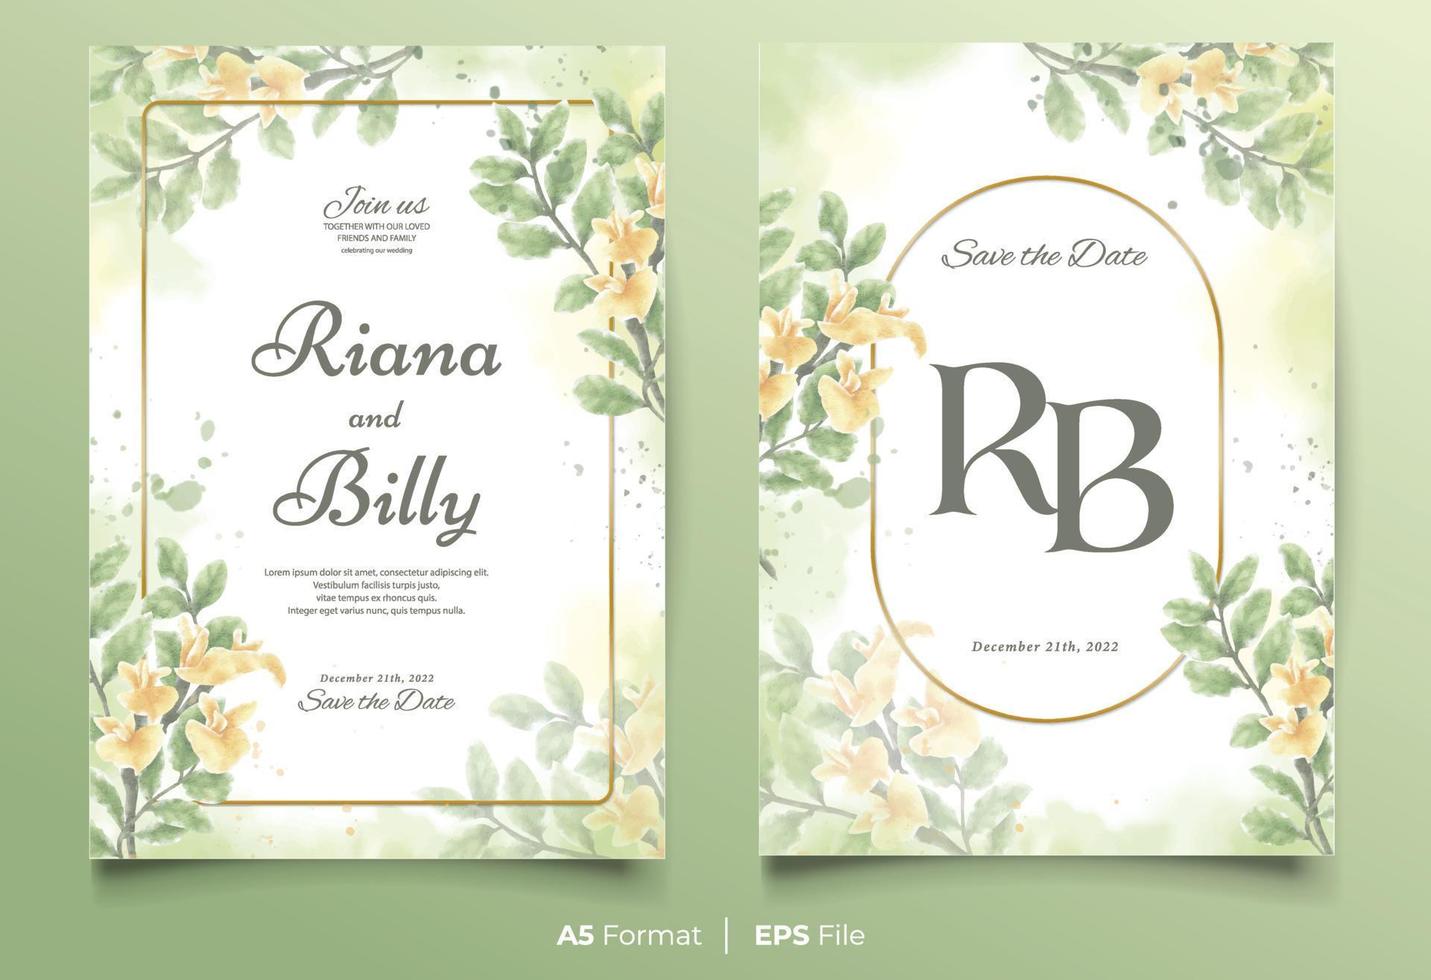 Watercolor wedding invitation template with yellow and green flower ornament vector